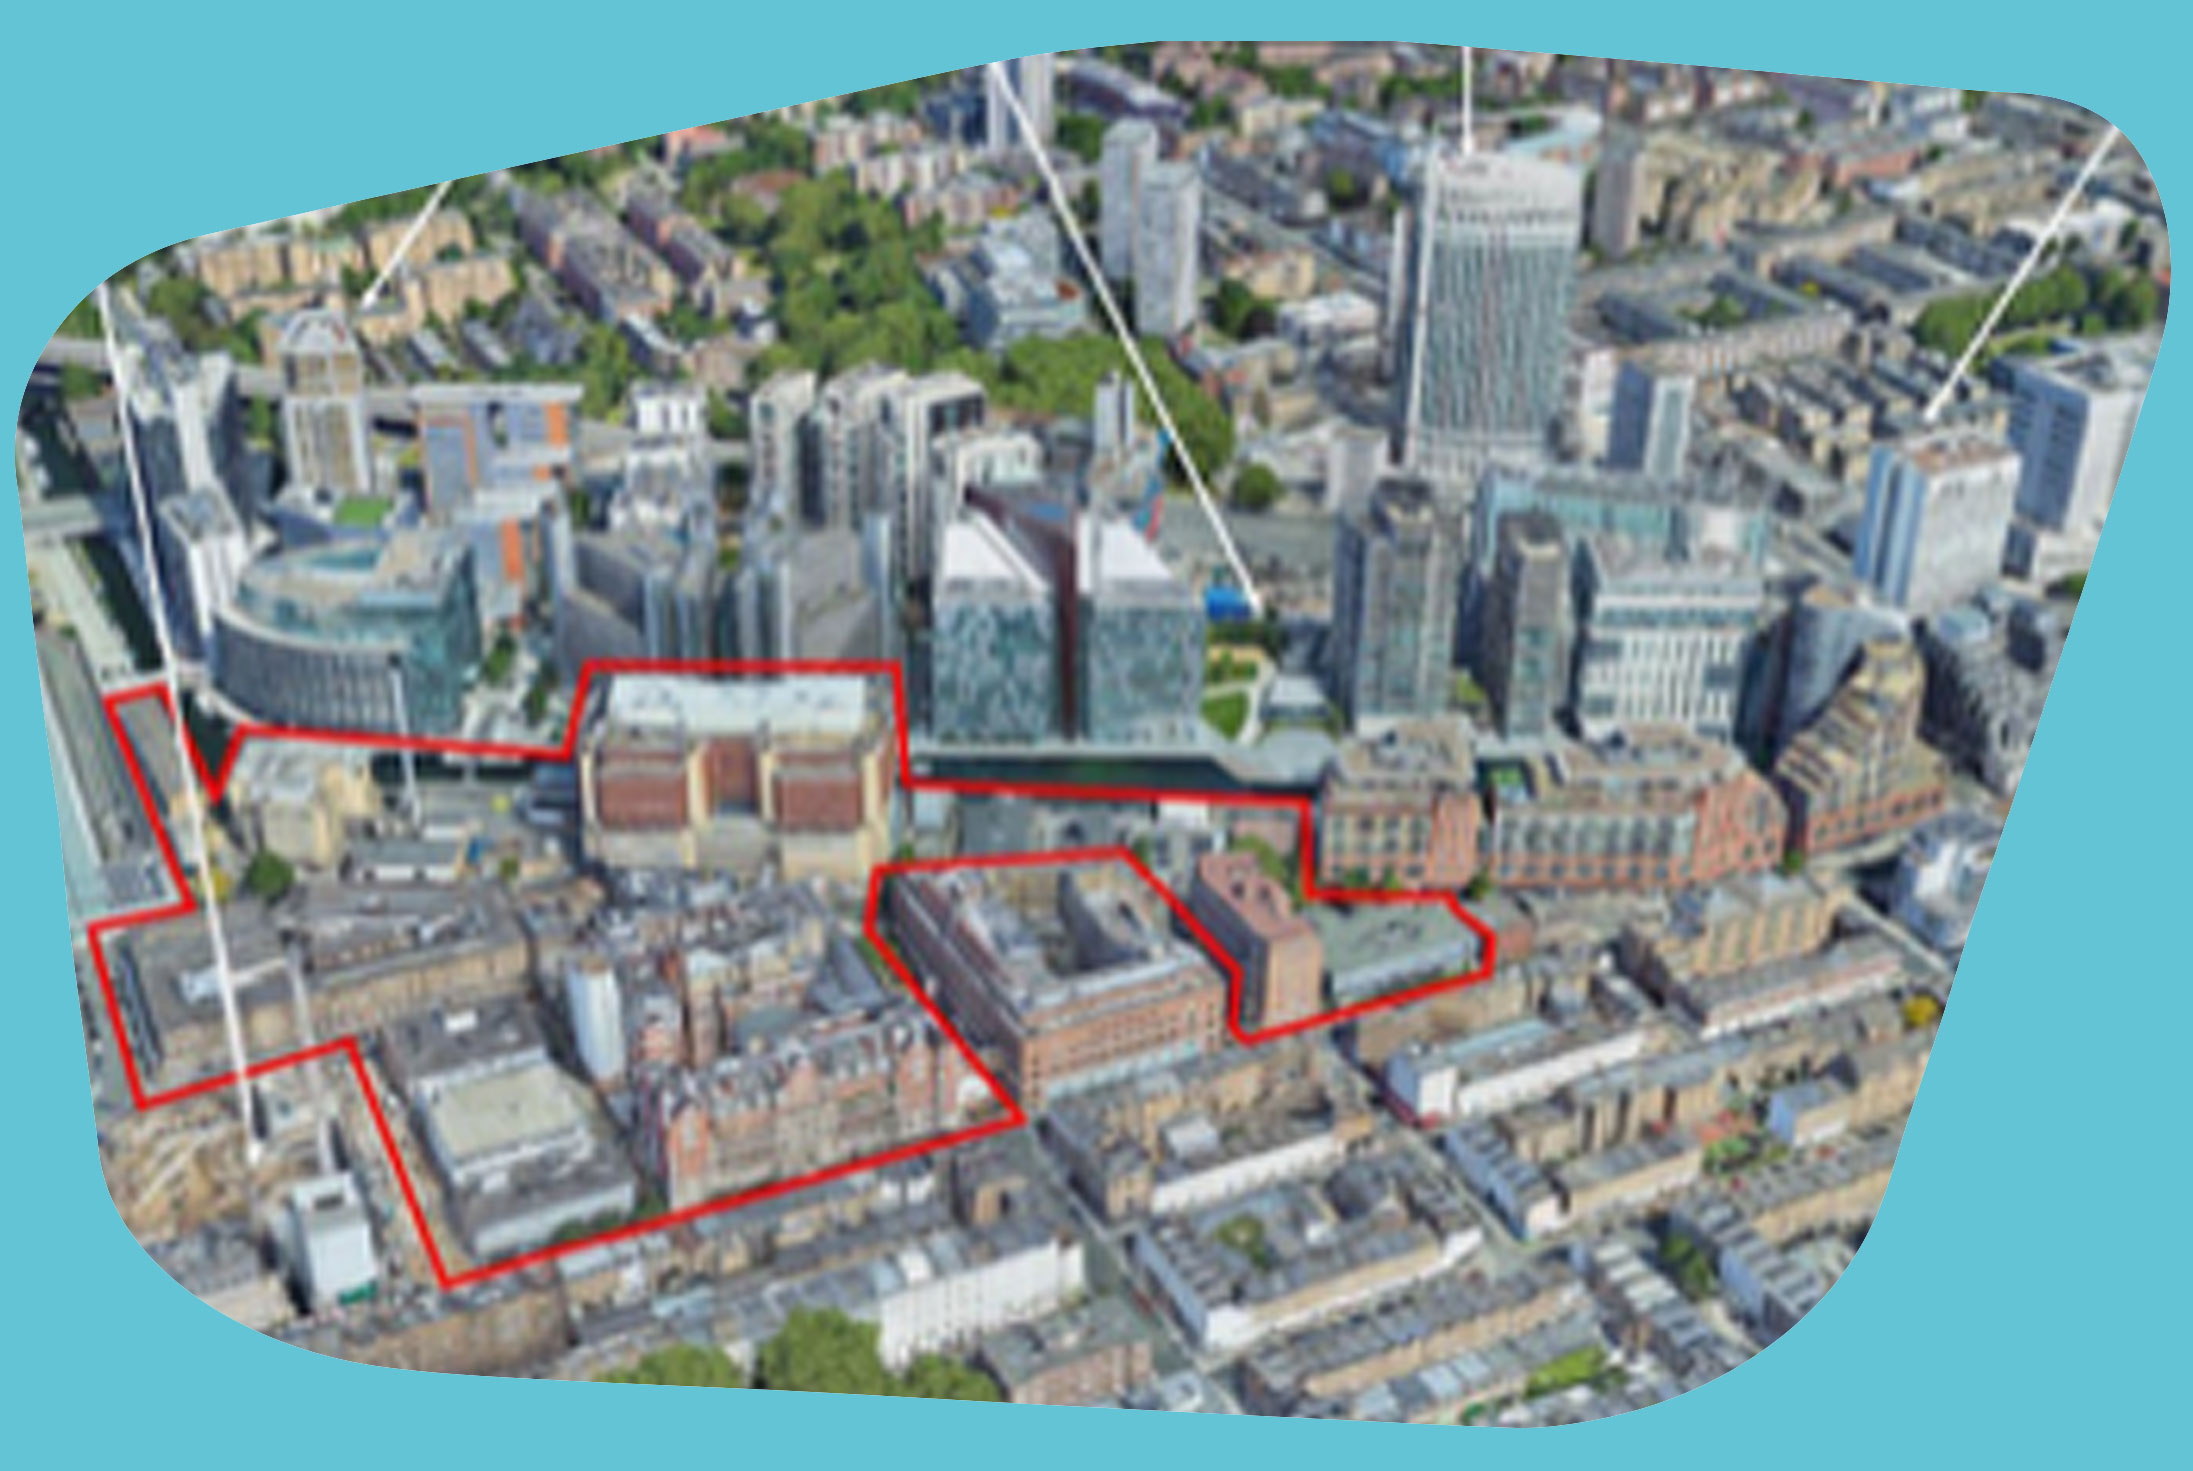 Overview of the St Mary’s site, with redline boundary